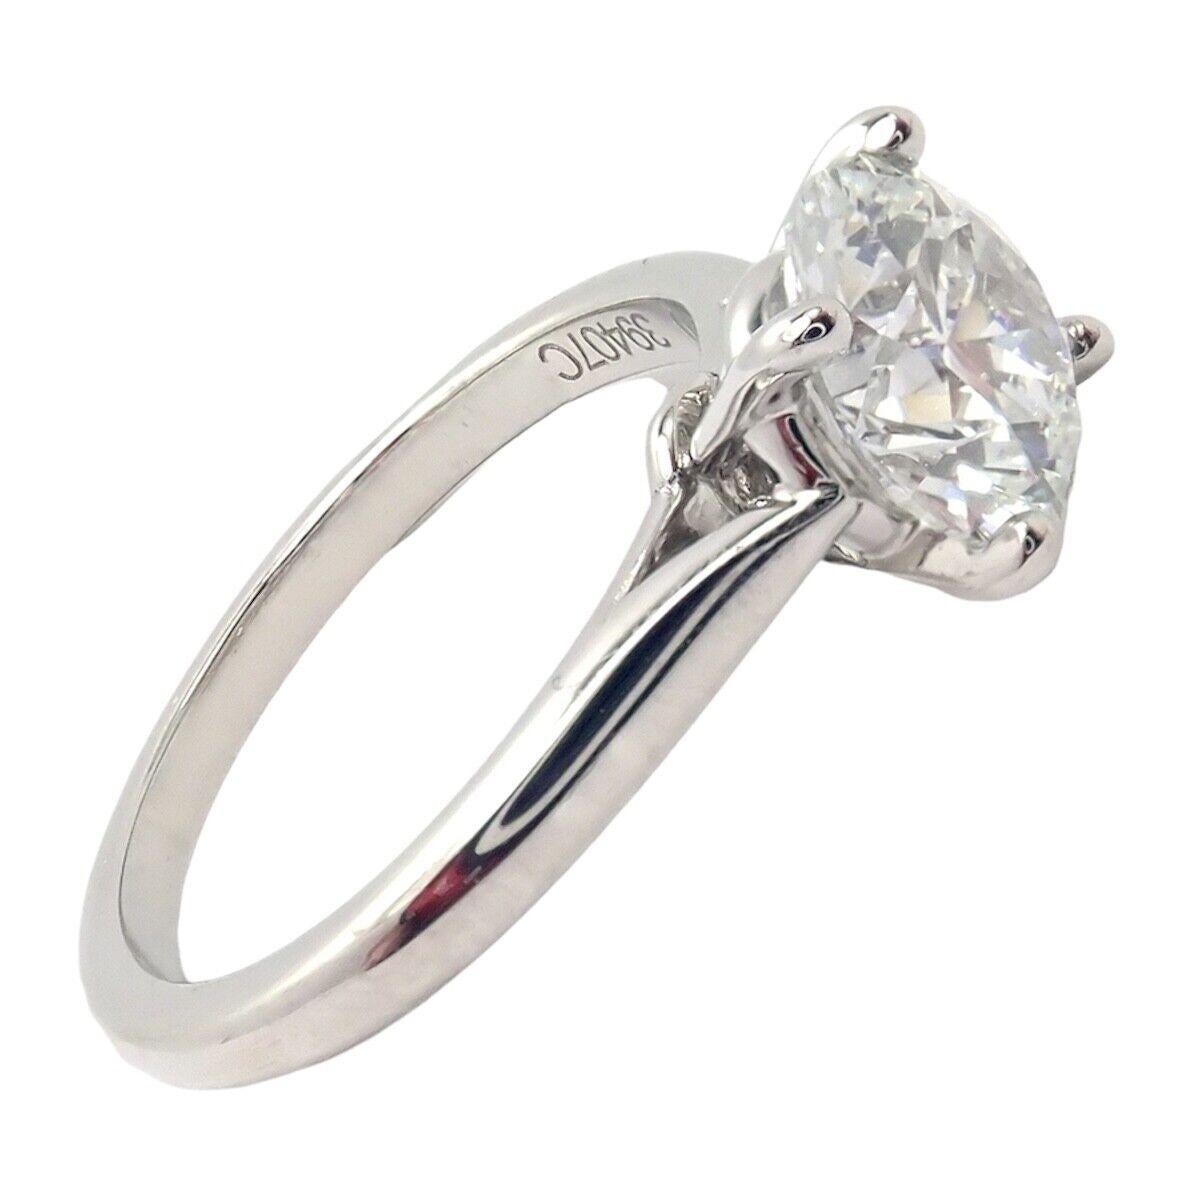 Platinum 1.30ct Diamond Engagement Solitaire Ring by Cartier. 
With 1 round brilliant cut diamond VS1 clarity F color total weight 1.30ct
Cut, Polish, Symmetry Excellent
Fluorescence NONE
This ring comes with GIA certificate for a diamond and a